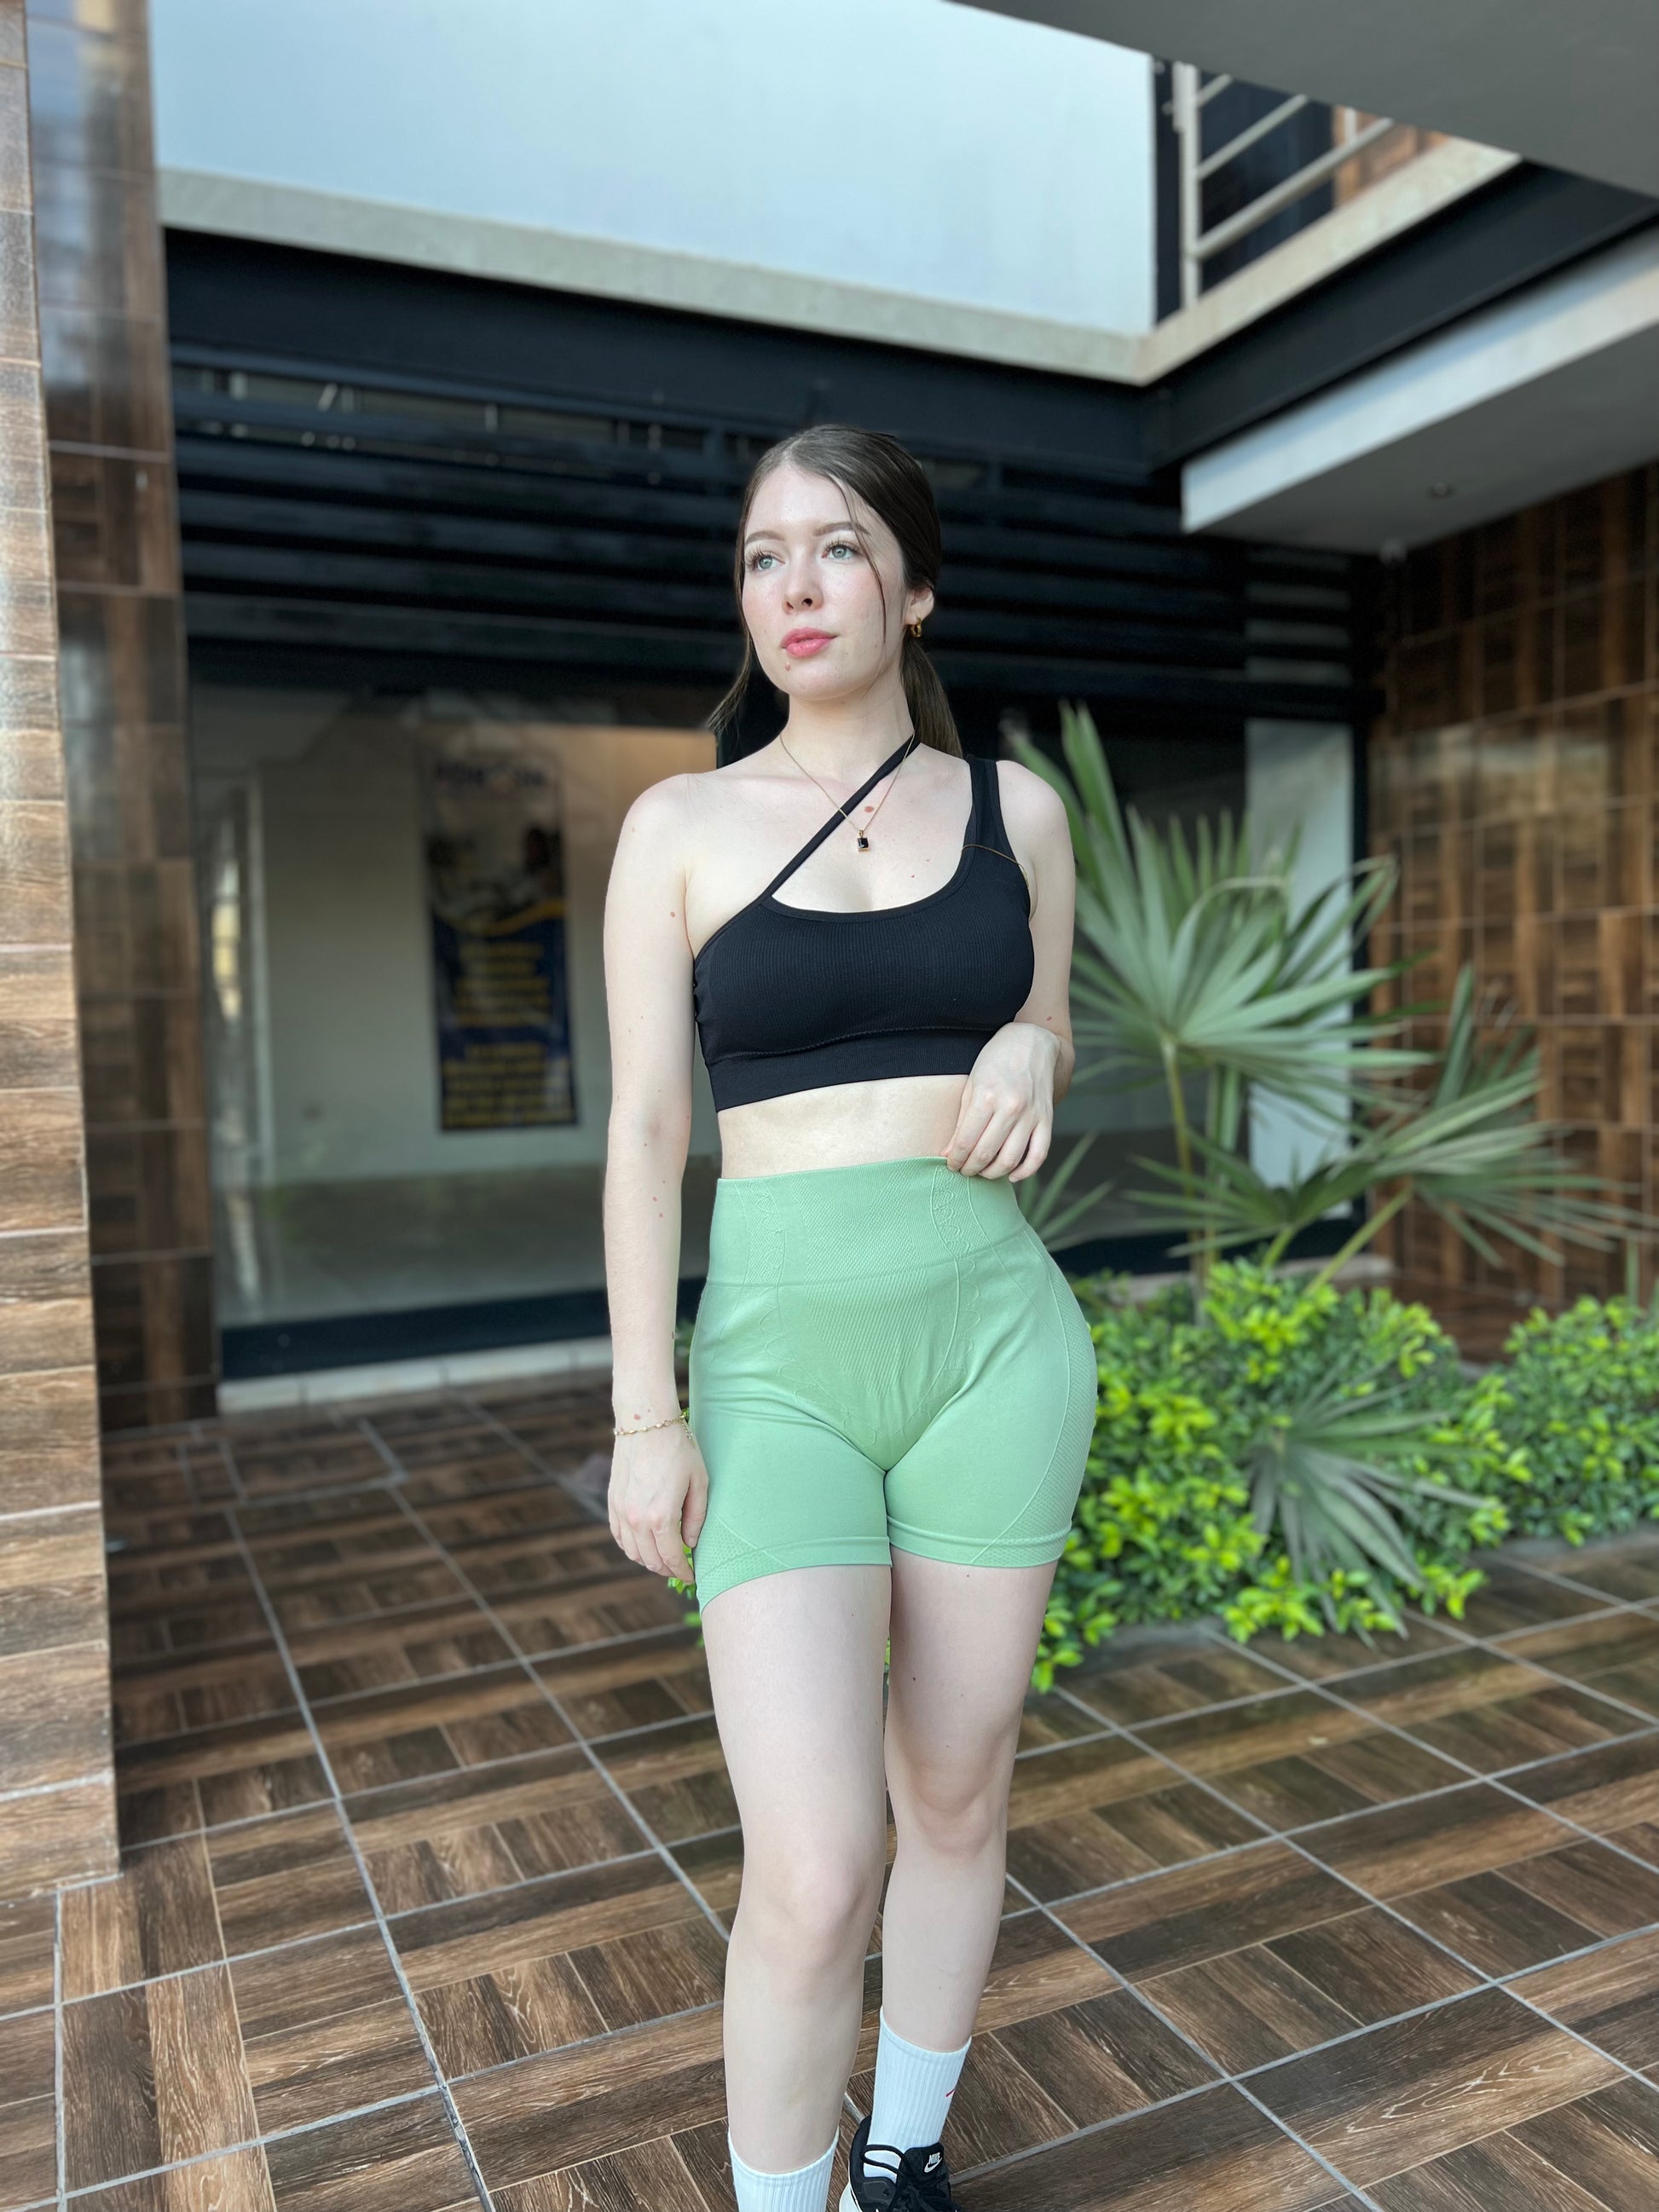 SHORT DEPORTIVO EFECTO “PUSH UP” – Oh my look boutique